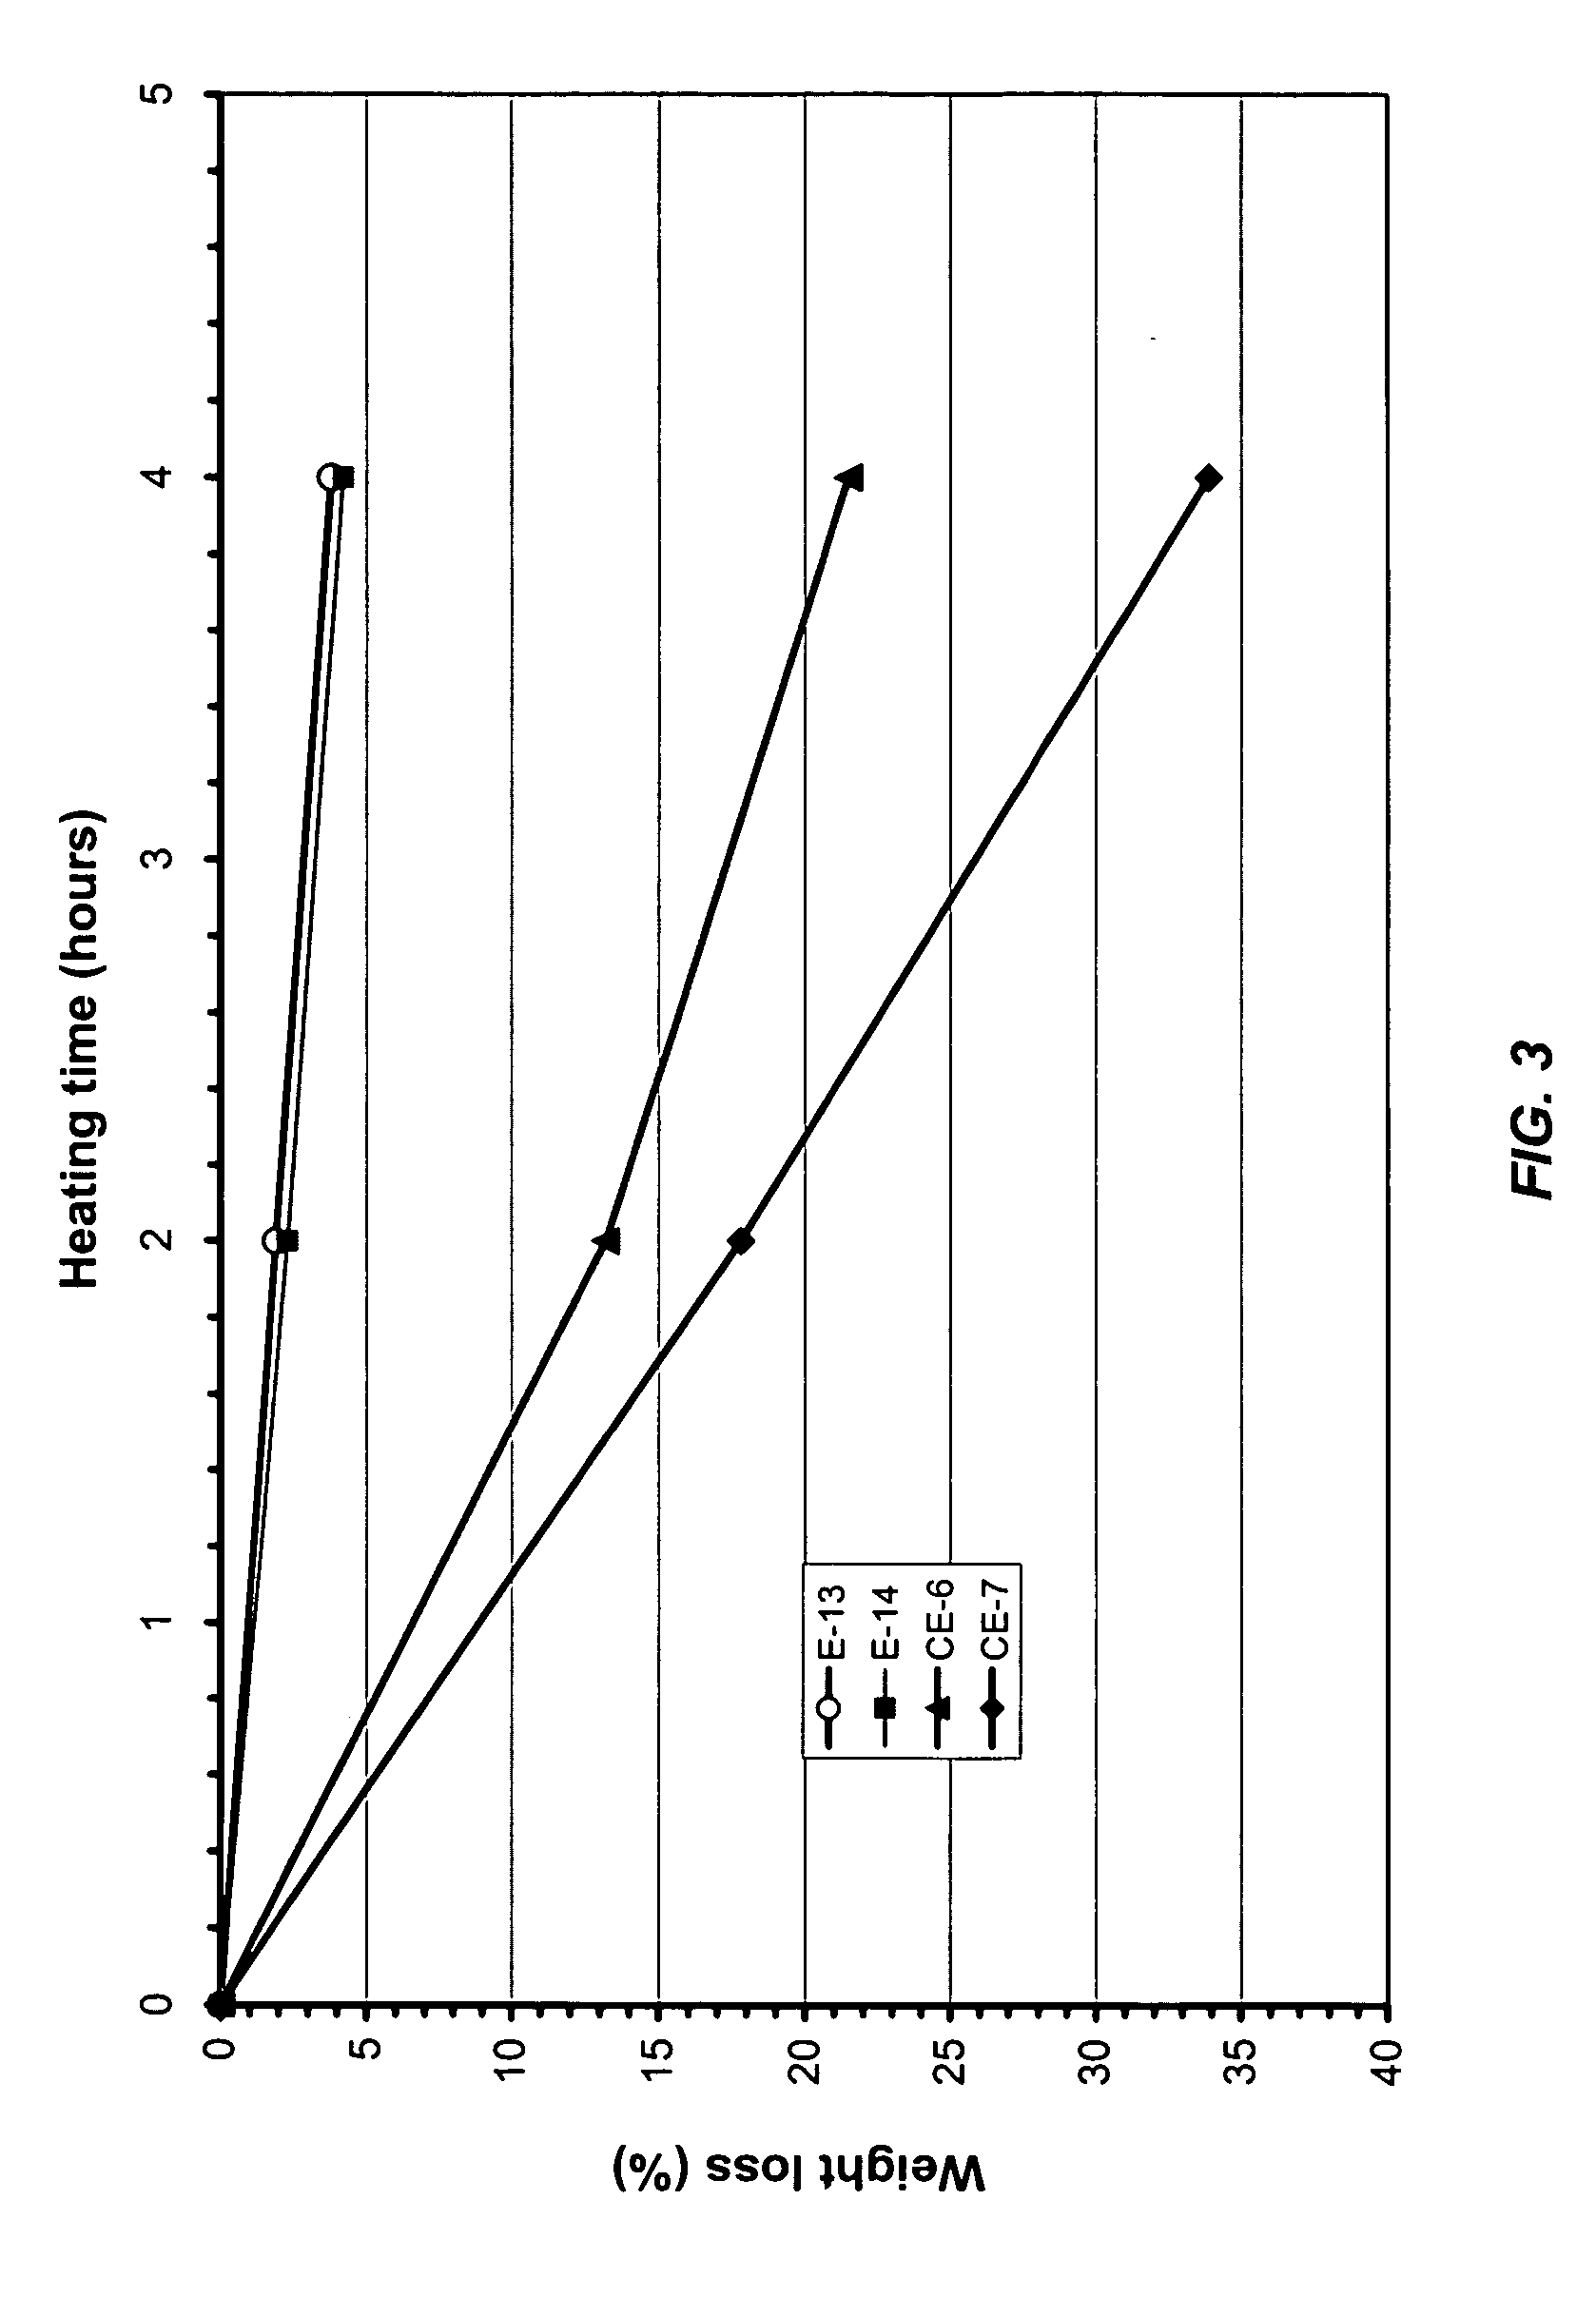 Non-aqueous electrolytes having an extended temperature range for battery applications